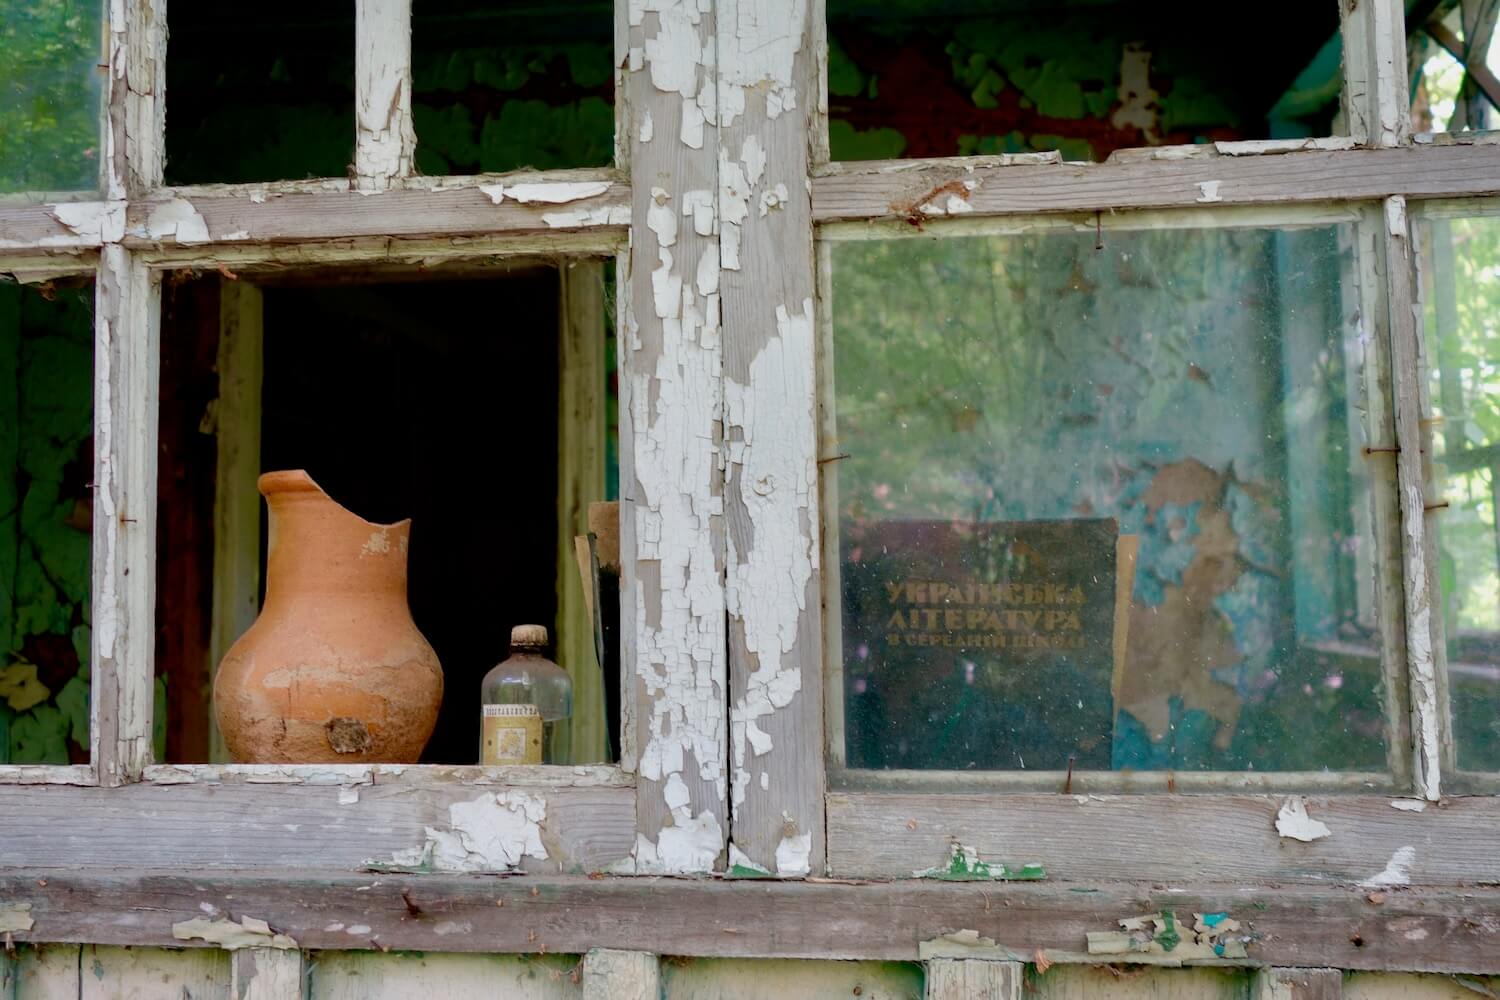 An abandoned home in the small village of Chernobyl in Ukraine.  This shot looks through a broken window with gray paint chips flaking off the frame.  Inside on the window sill is a clay picture with a chip on the top and some medicine in a glass bottle.  Behind another window pane is a book with Russian writing on the cover.  The inside room is an aqua color with the surfaces of the wall peeling away.  